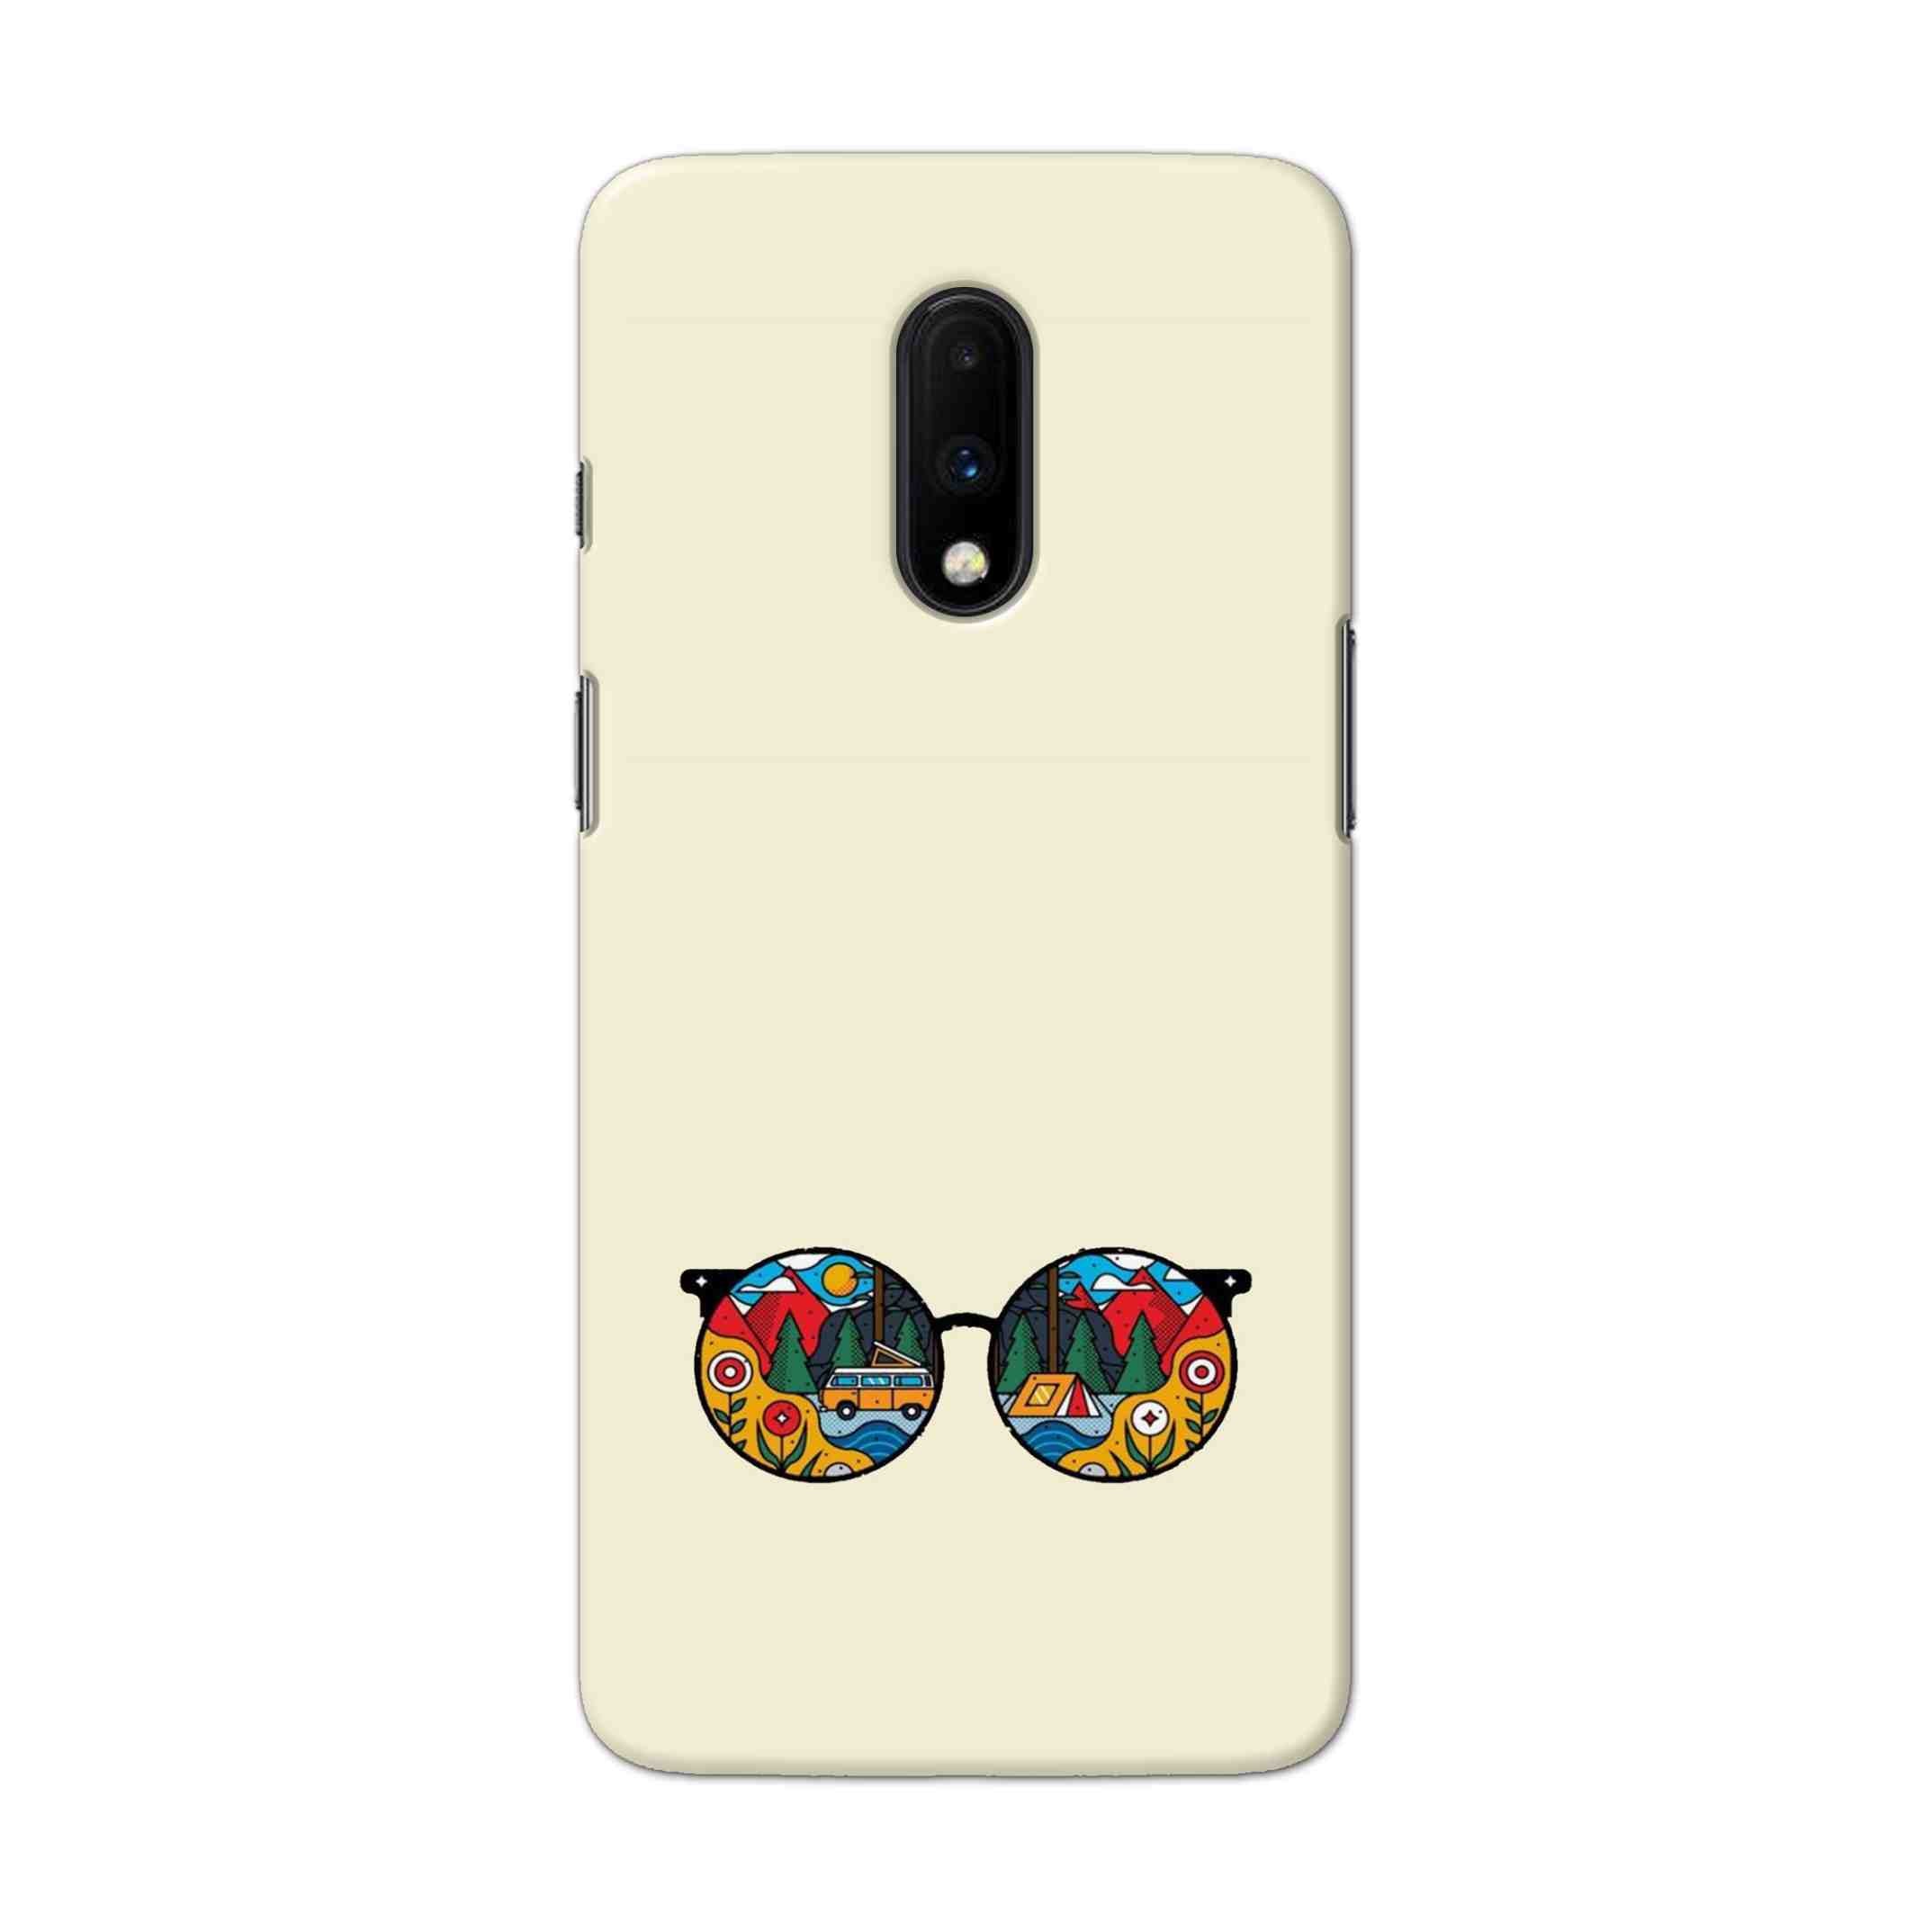 Buy Rainbow Sunglasses Hard Back Mobile Phone Case Cover For OnePlus 7 Online